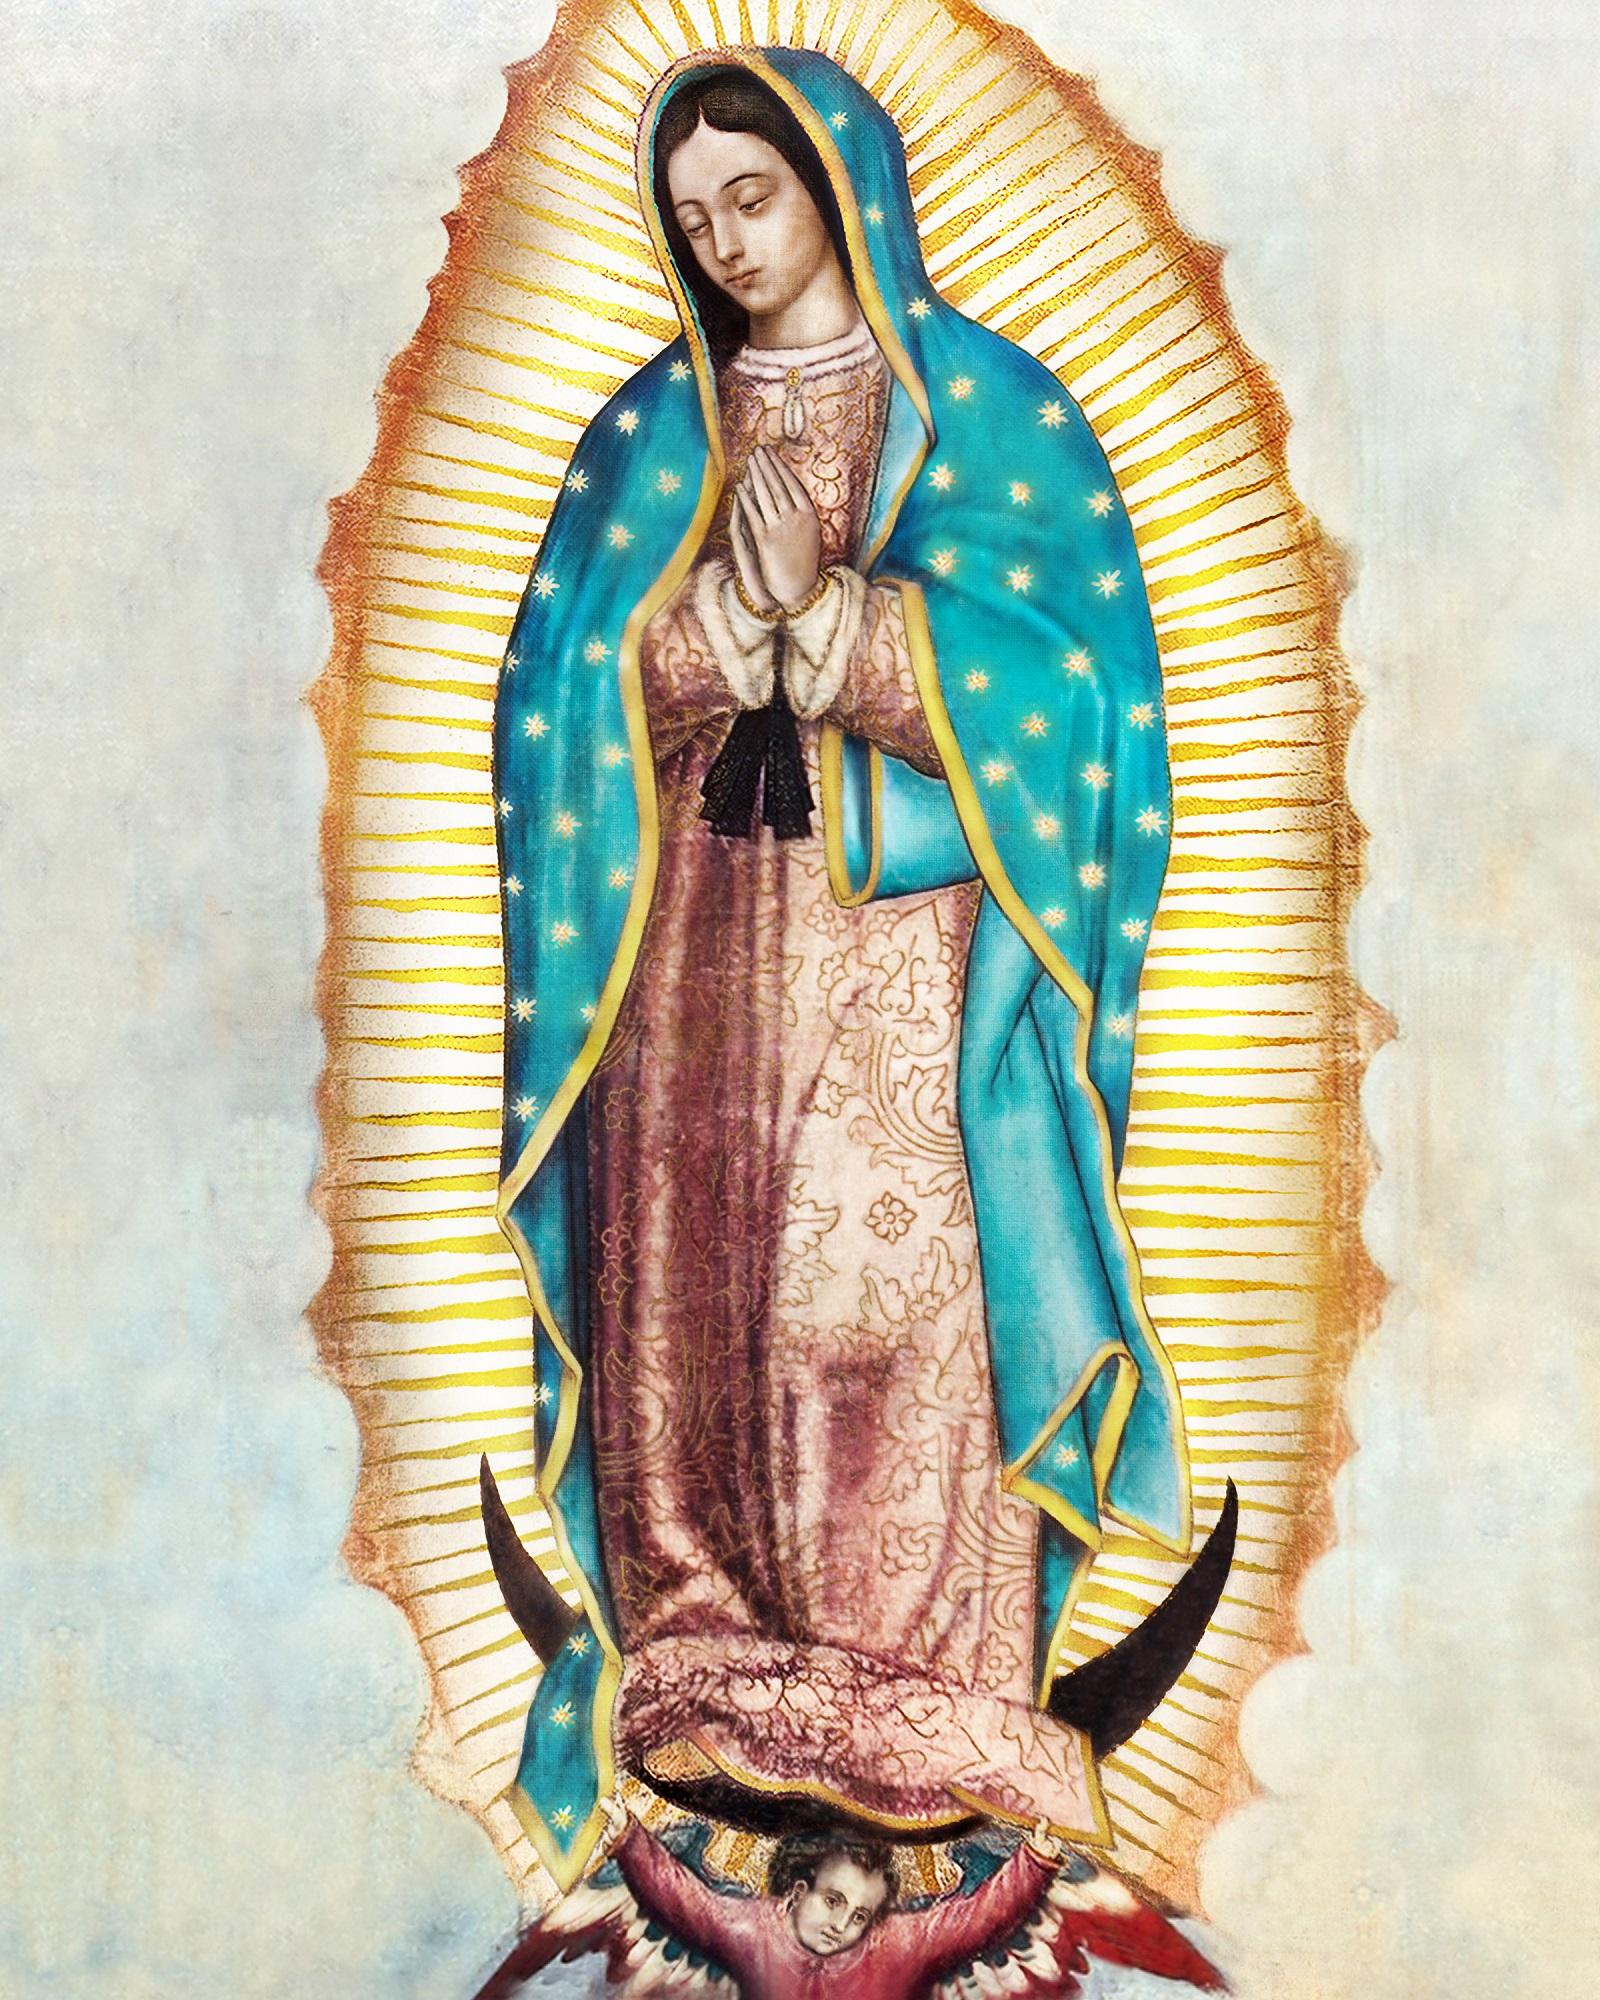 Our Lady of Guadalupe Wallpapers - Top Free Our Lady of Guadalupe ...